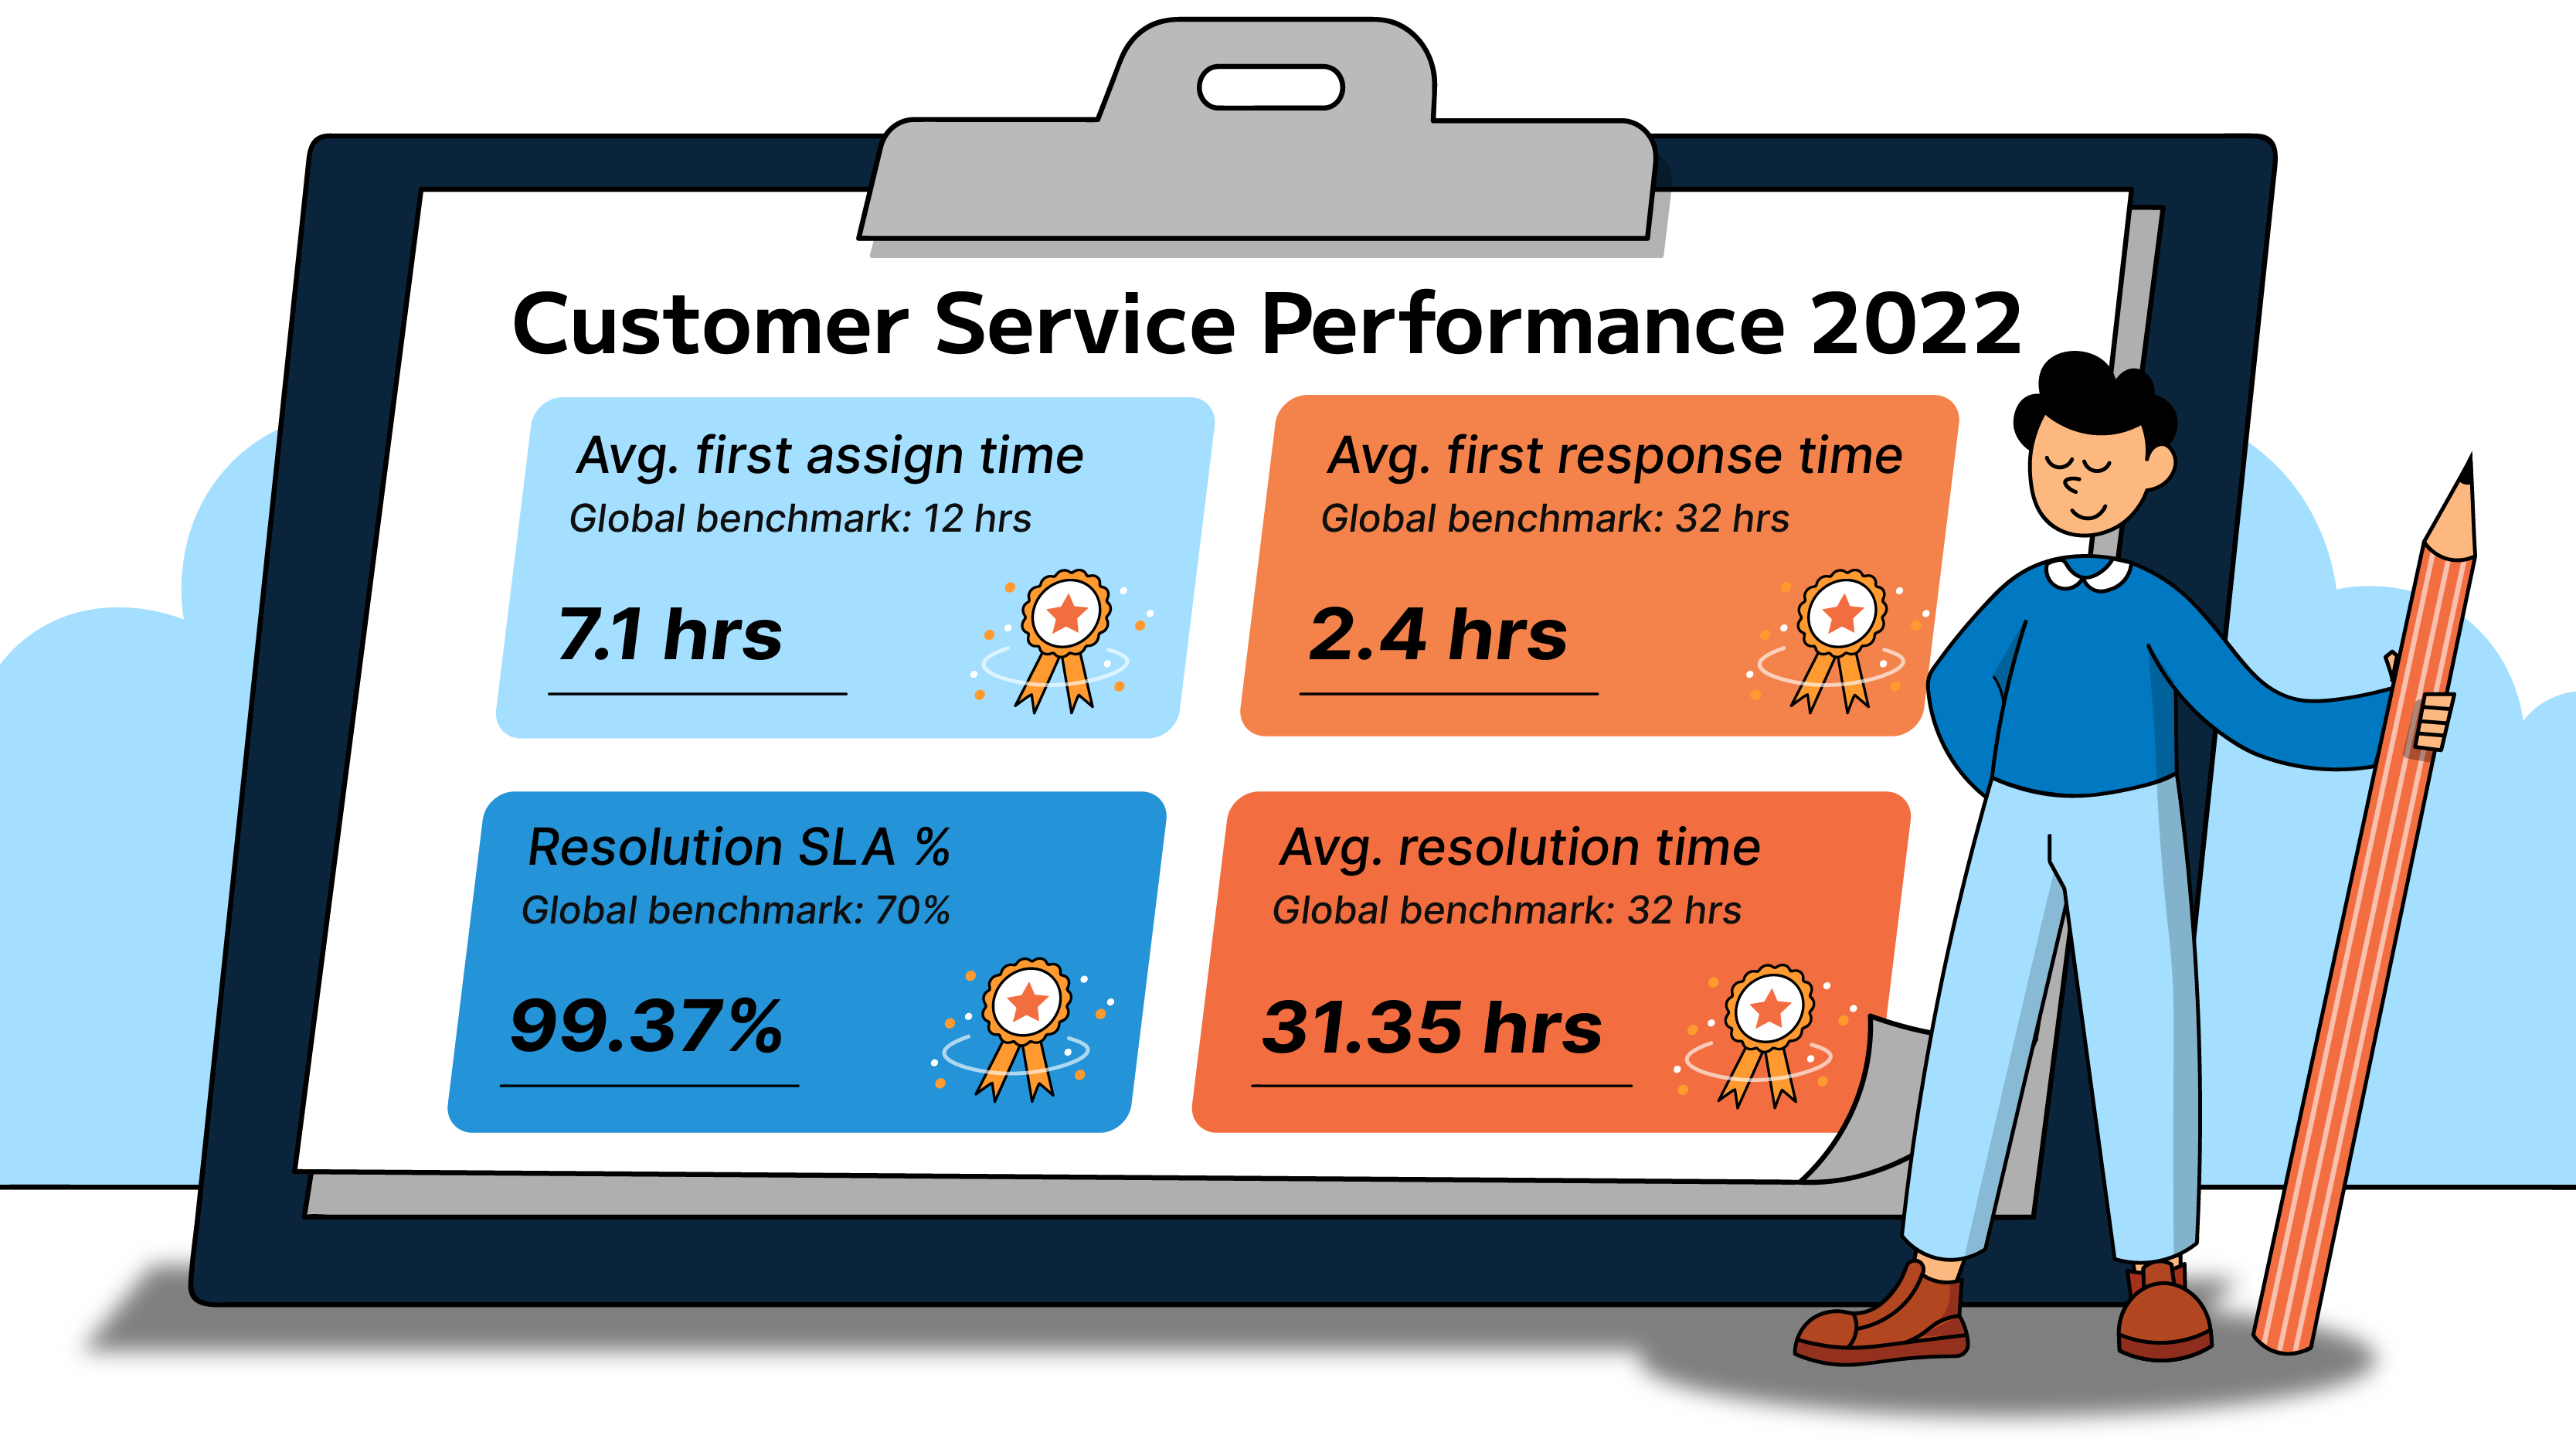 Gorilla Expense exceeded the global benchmark for customer service metrics in 2022